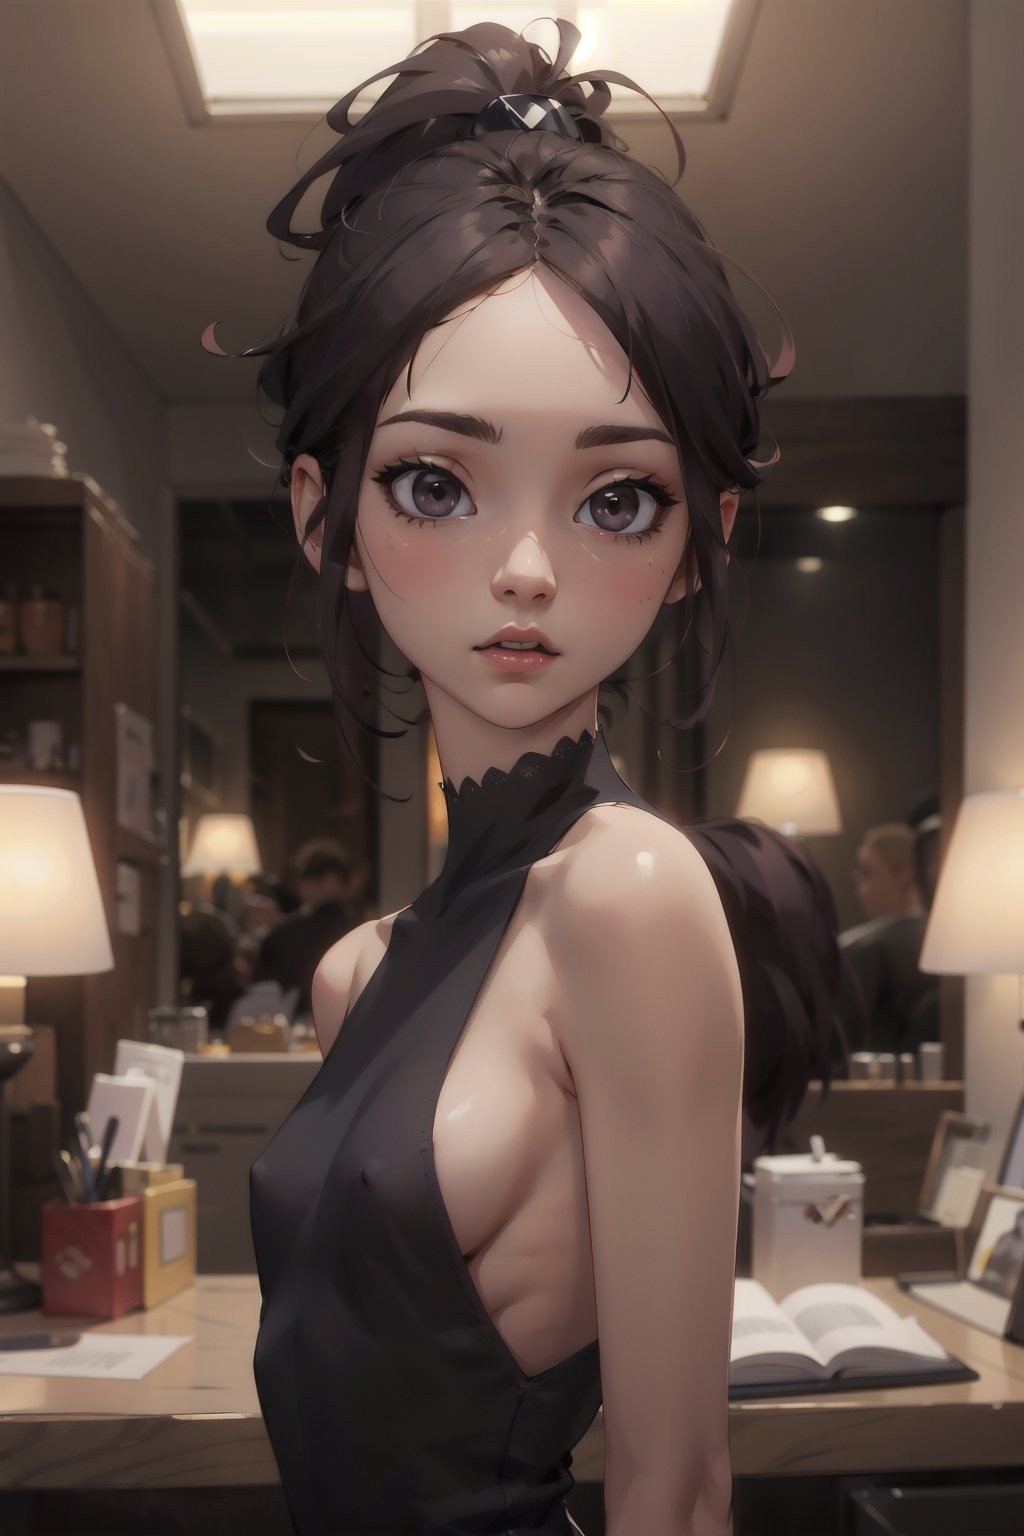 Highres, best quality, extremely detailed, area lighting in background, HD, 8k, 1girl, cute, goth, pervert, small body, small breasts, no_bra,